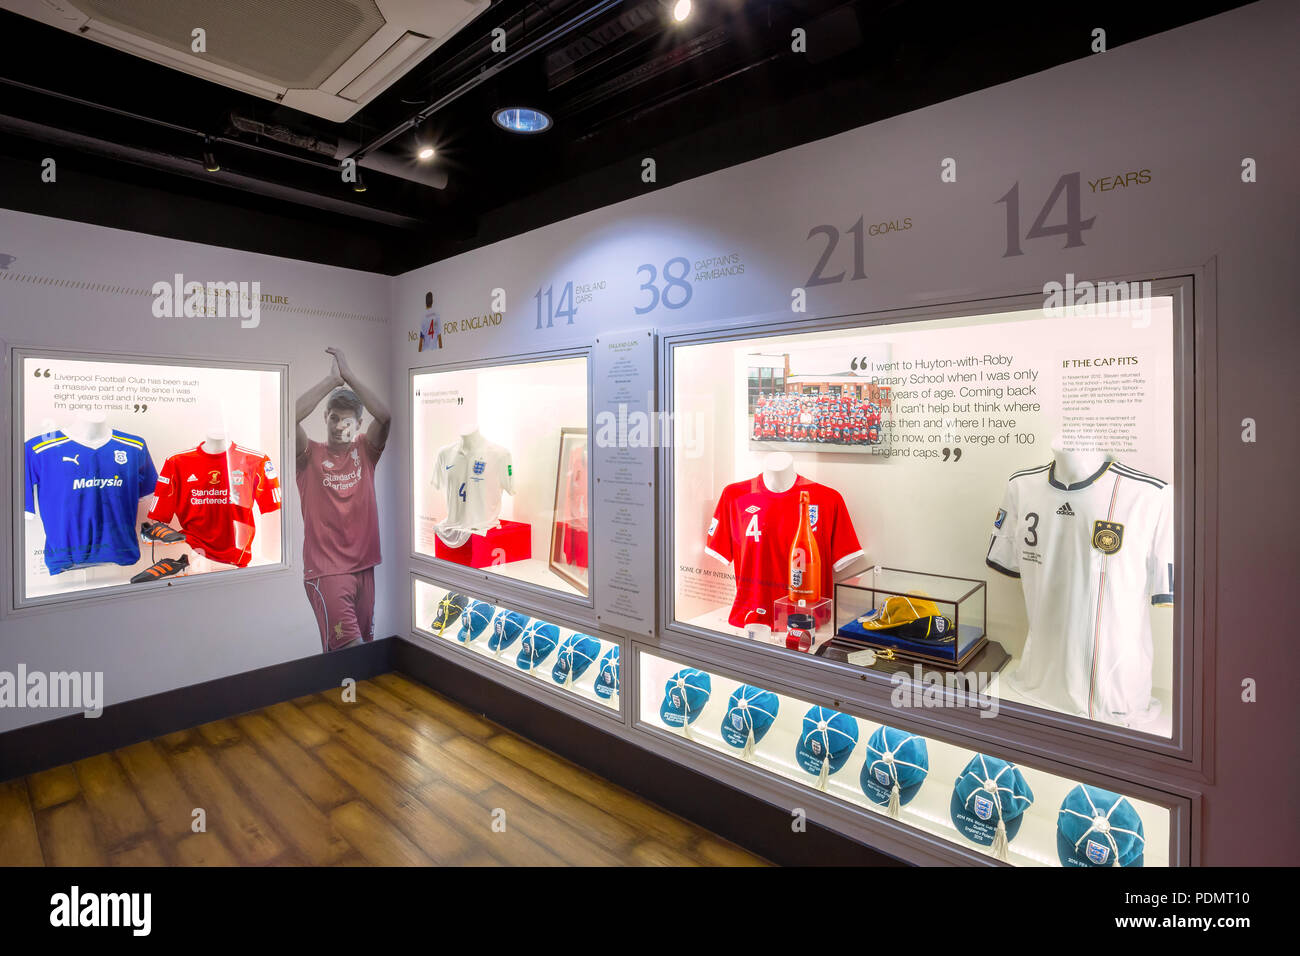 LIVERPOOL, UNITED KINGDOM - MAY 17 2018: The Steven Gerrard Collection in LFC Story museum collected incredible mementoes during a legendary and unfor Stock Photo